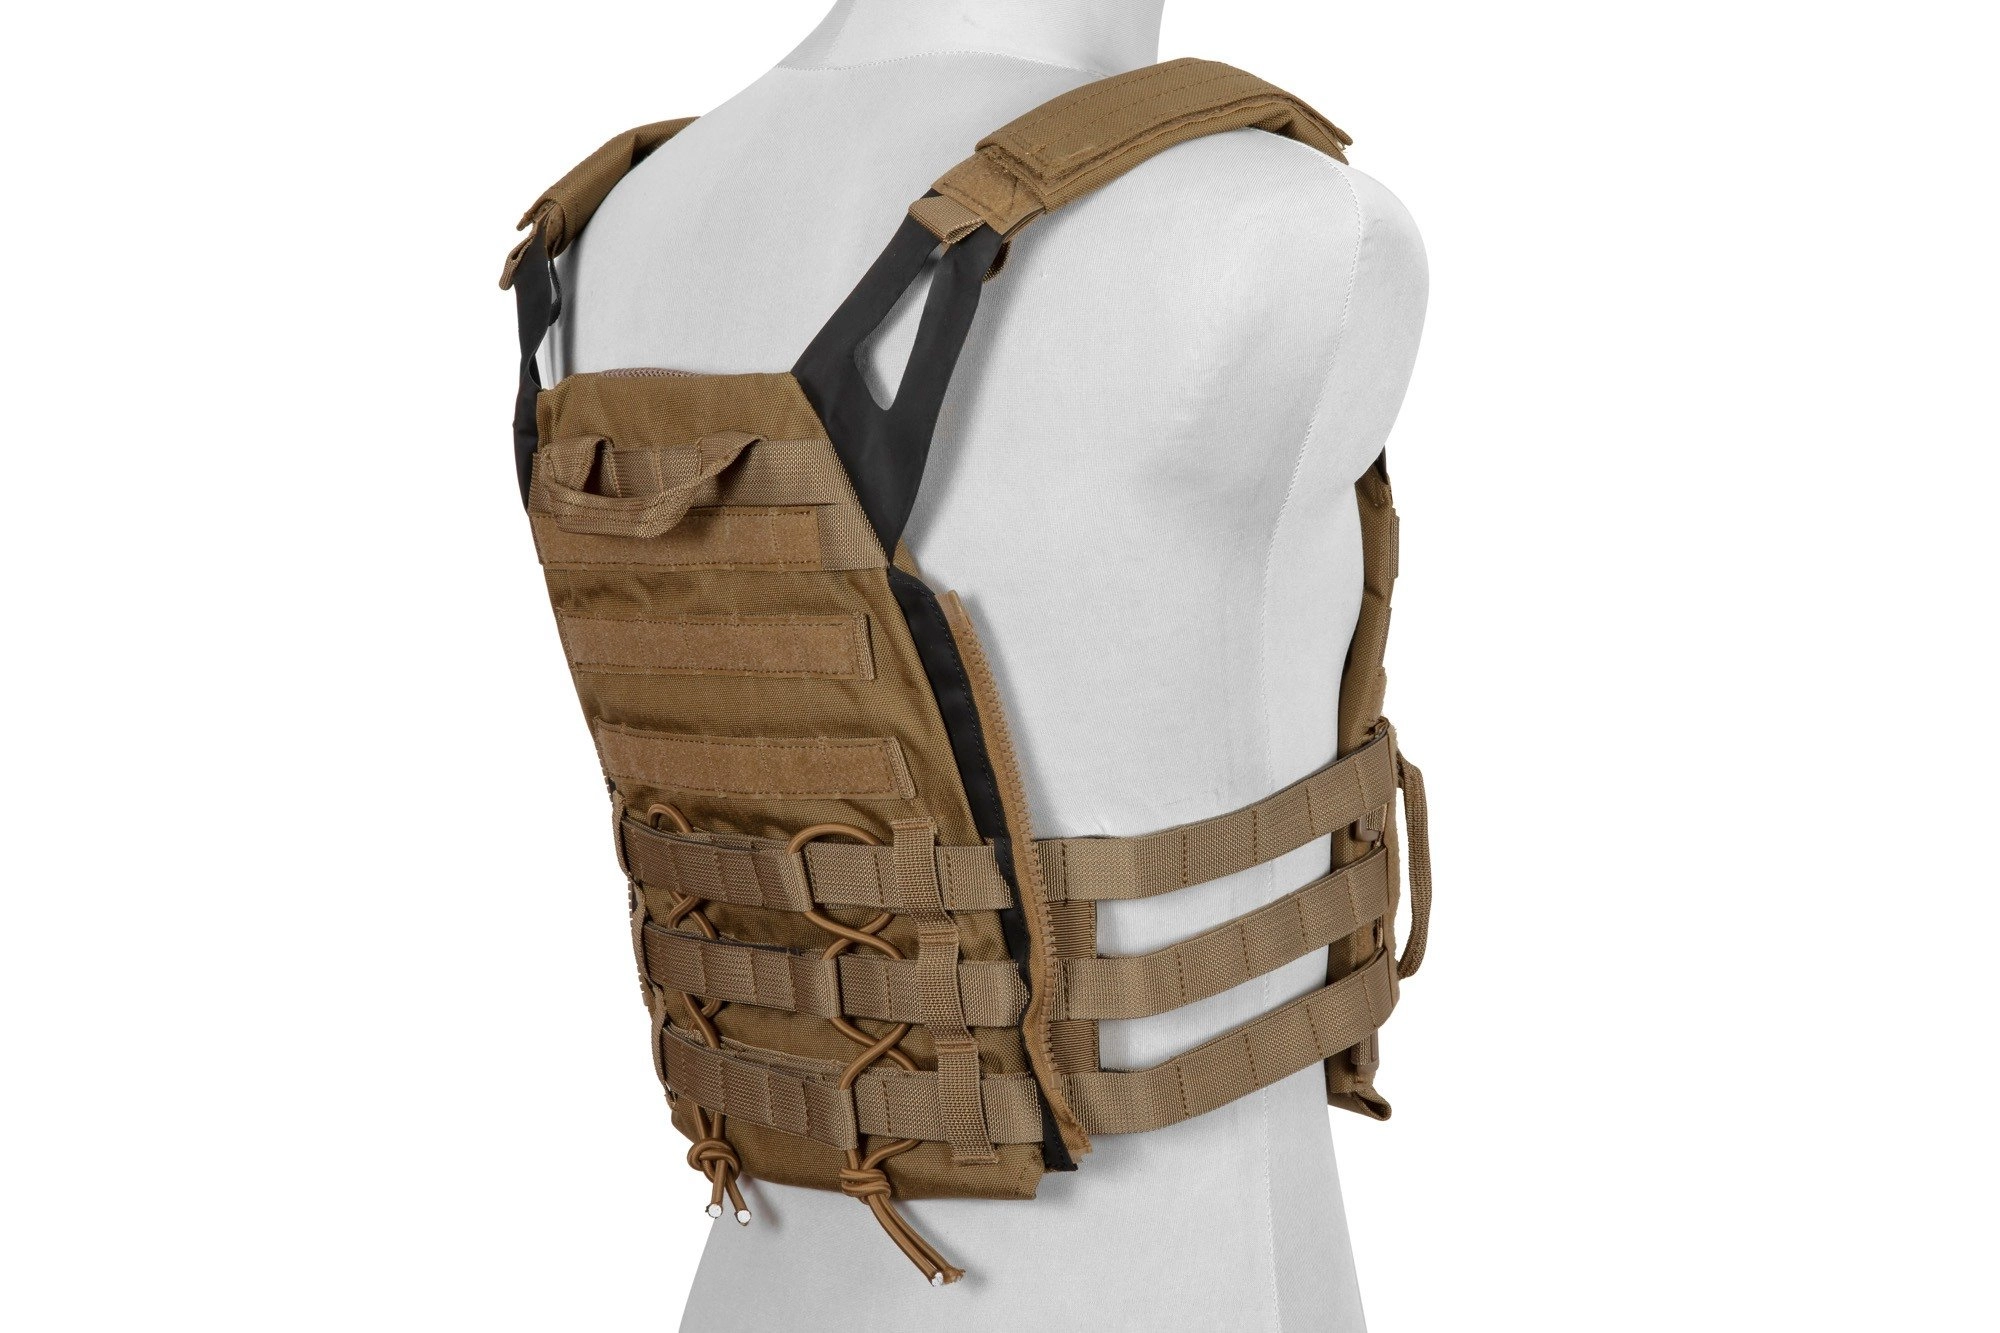 Rush 2.0 Plate Carrier Tactical Vest - Tan